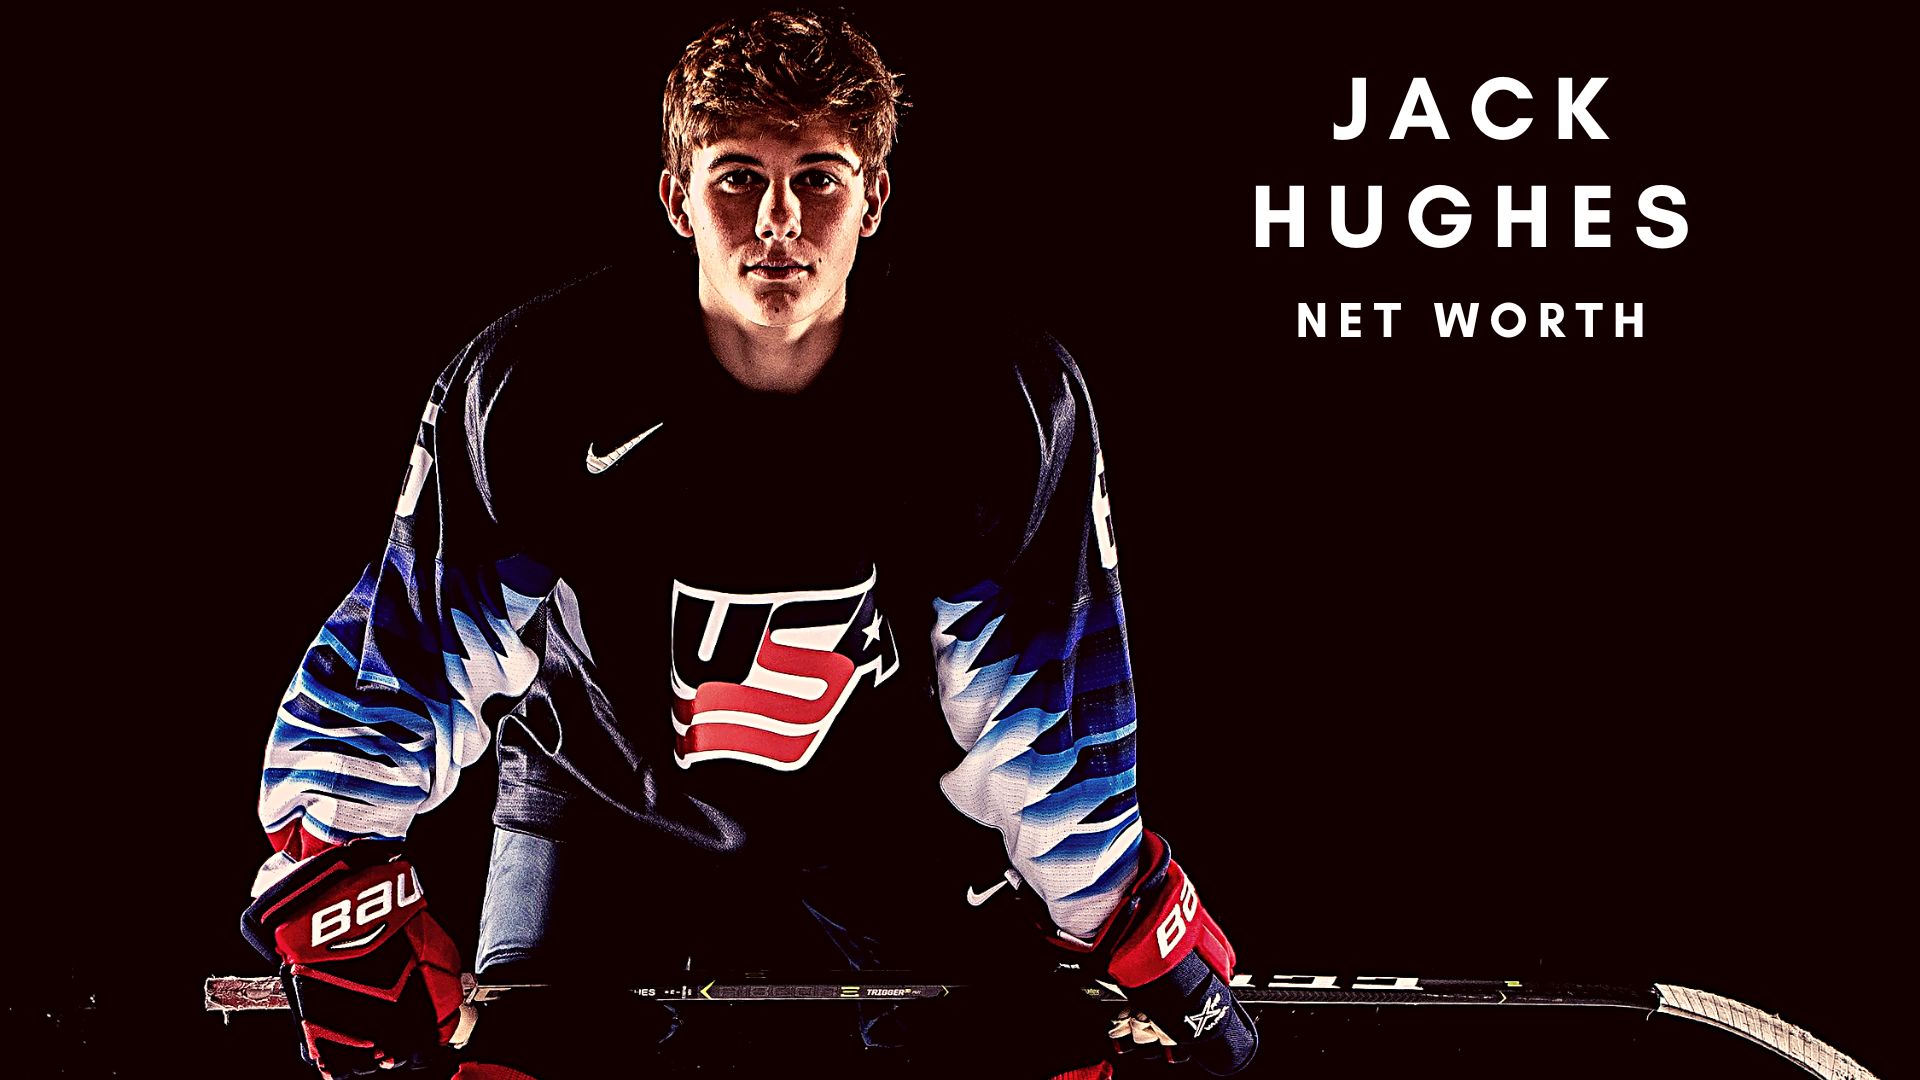 The Big Deal” Jack Hughes Now Has an Endorsement Deal with